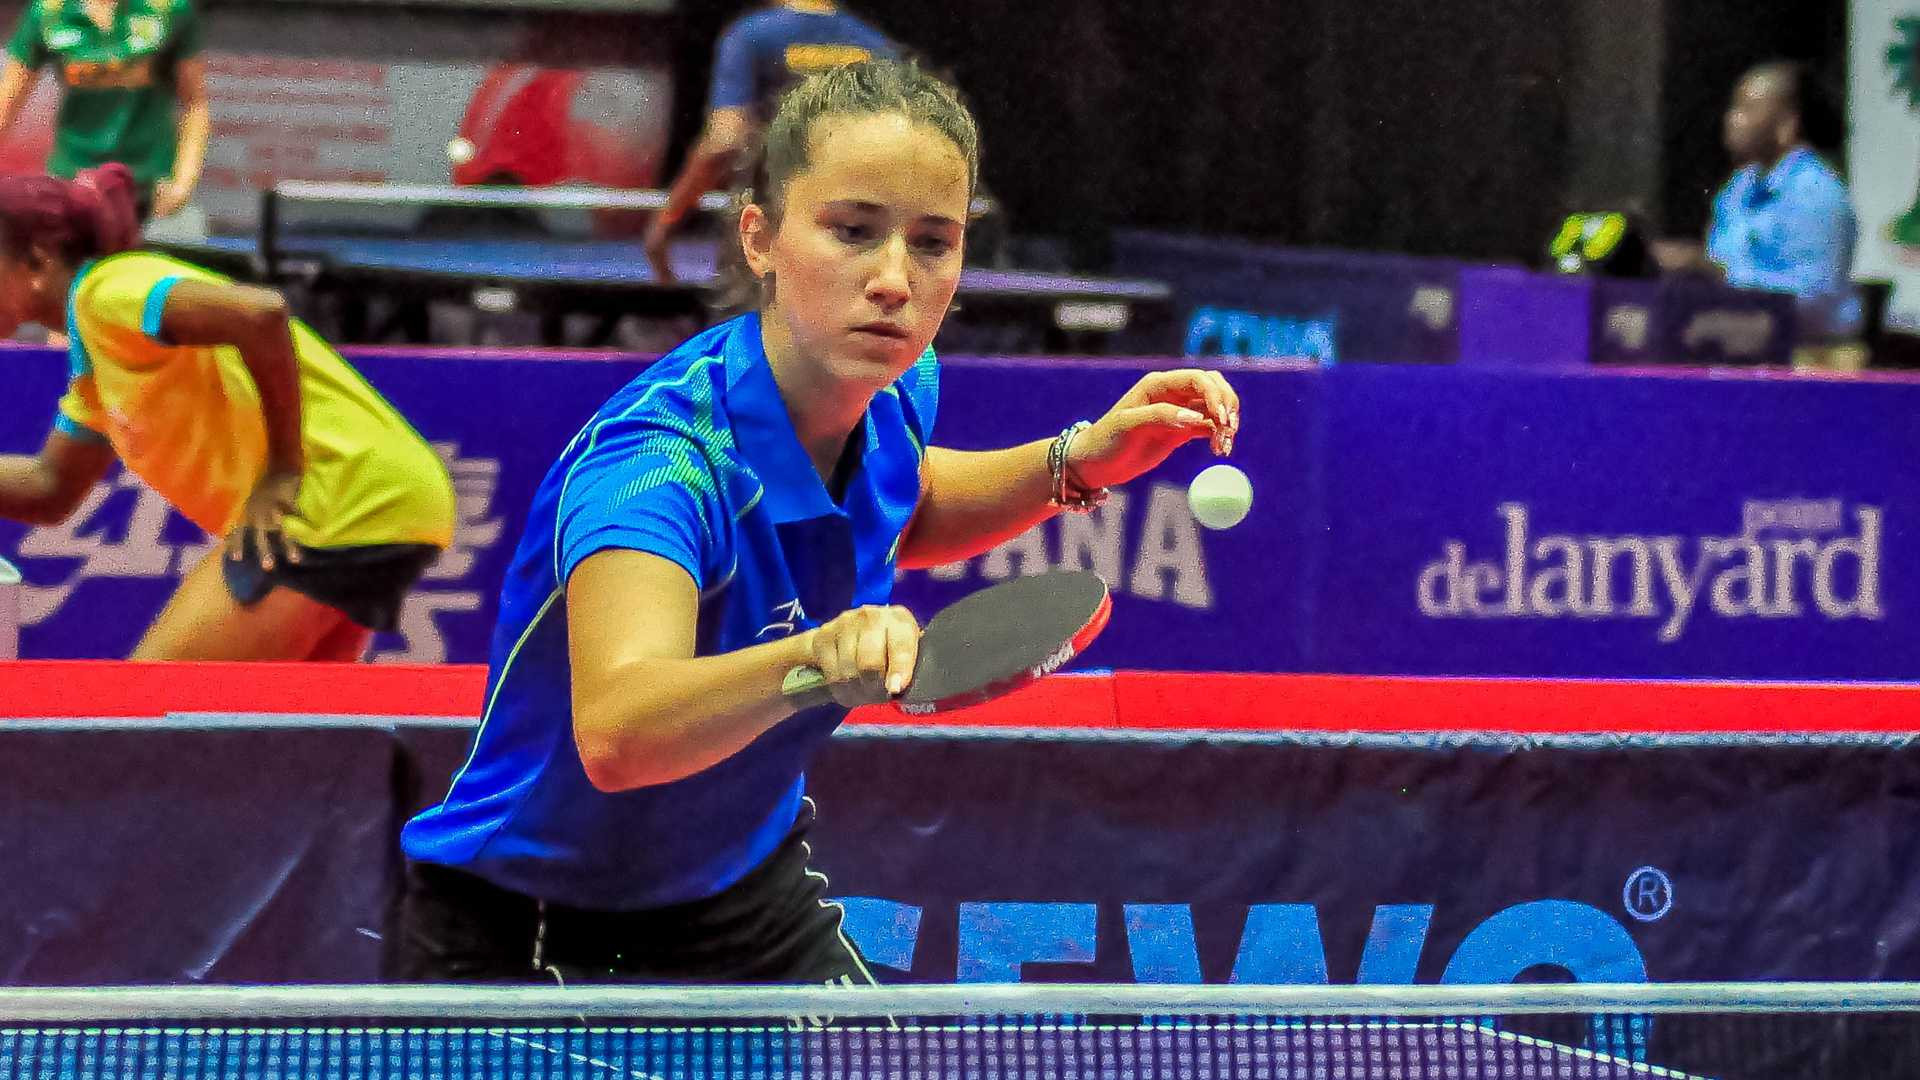 Romania's Andreea Dragoman came through a thrilling seven-game match in the first preliminary round of the women's singles event ©ITTF